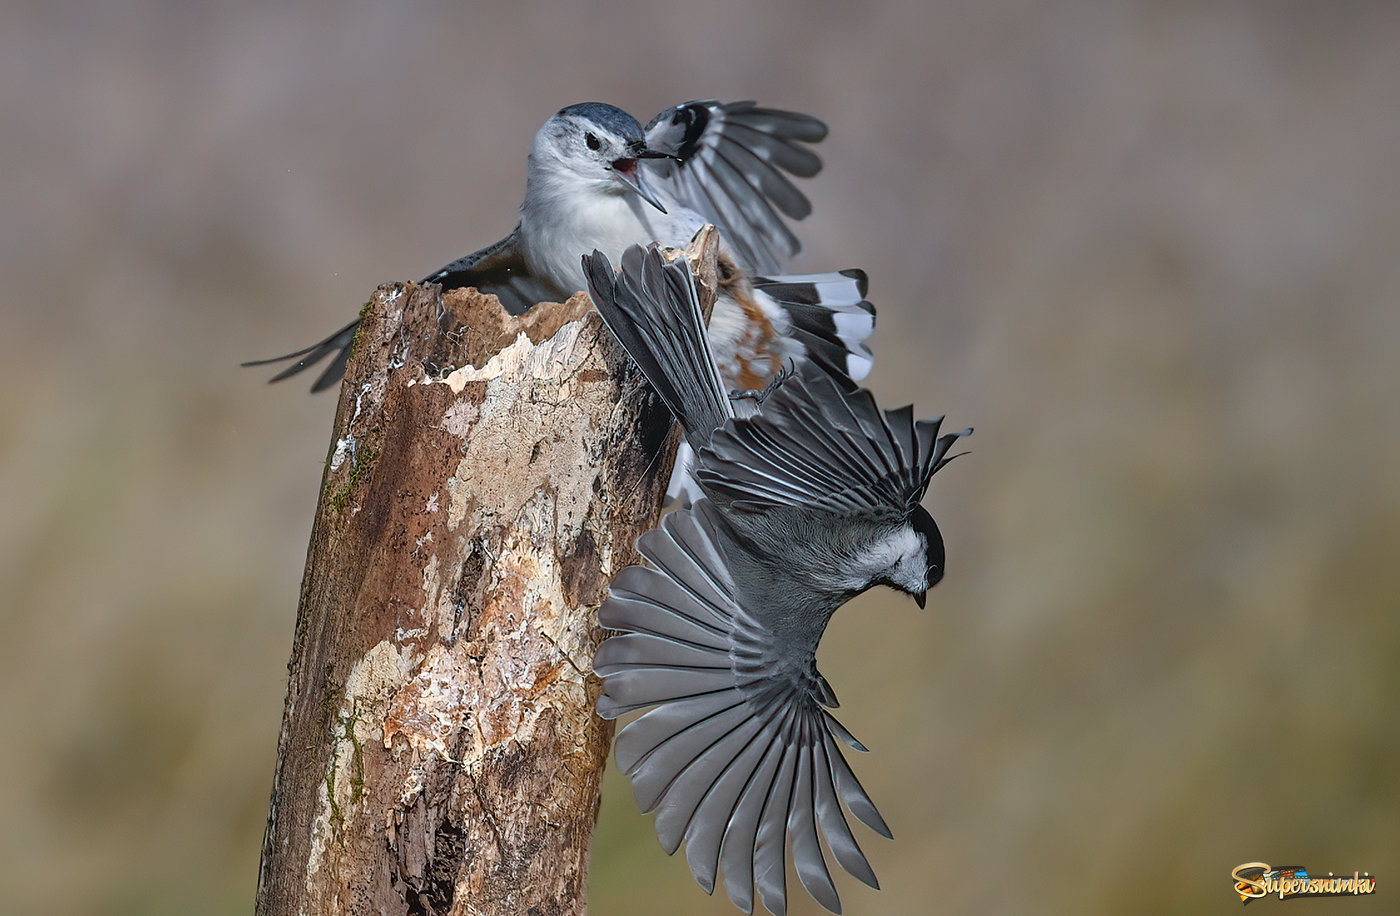 White-breasted nuthatch vs. Black-capped chickadee